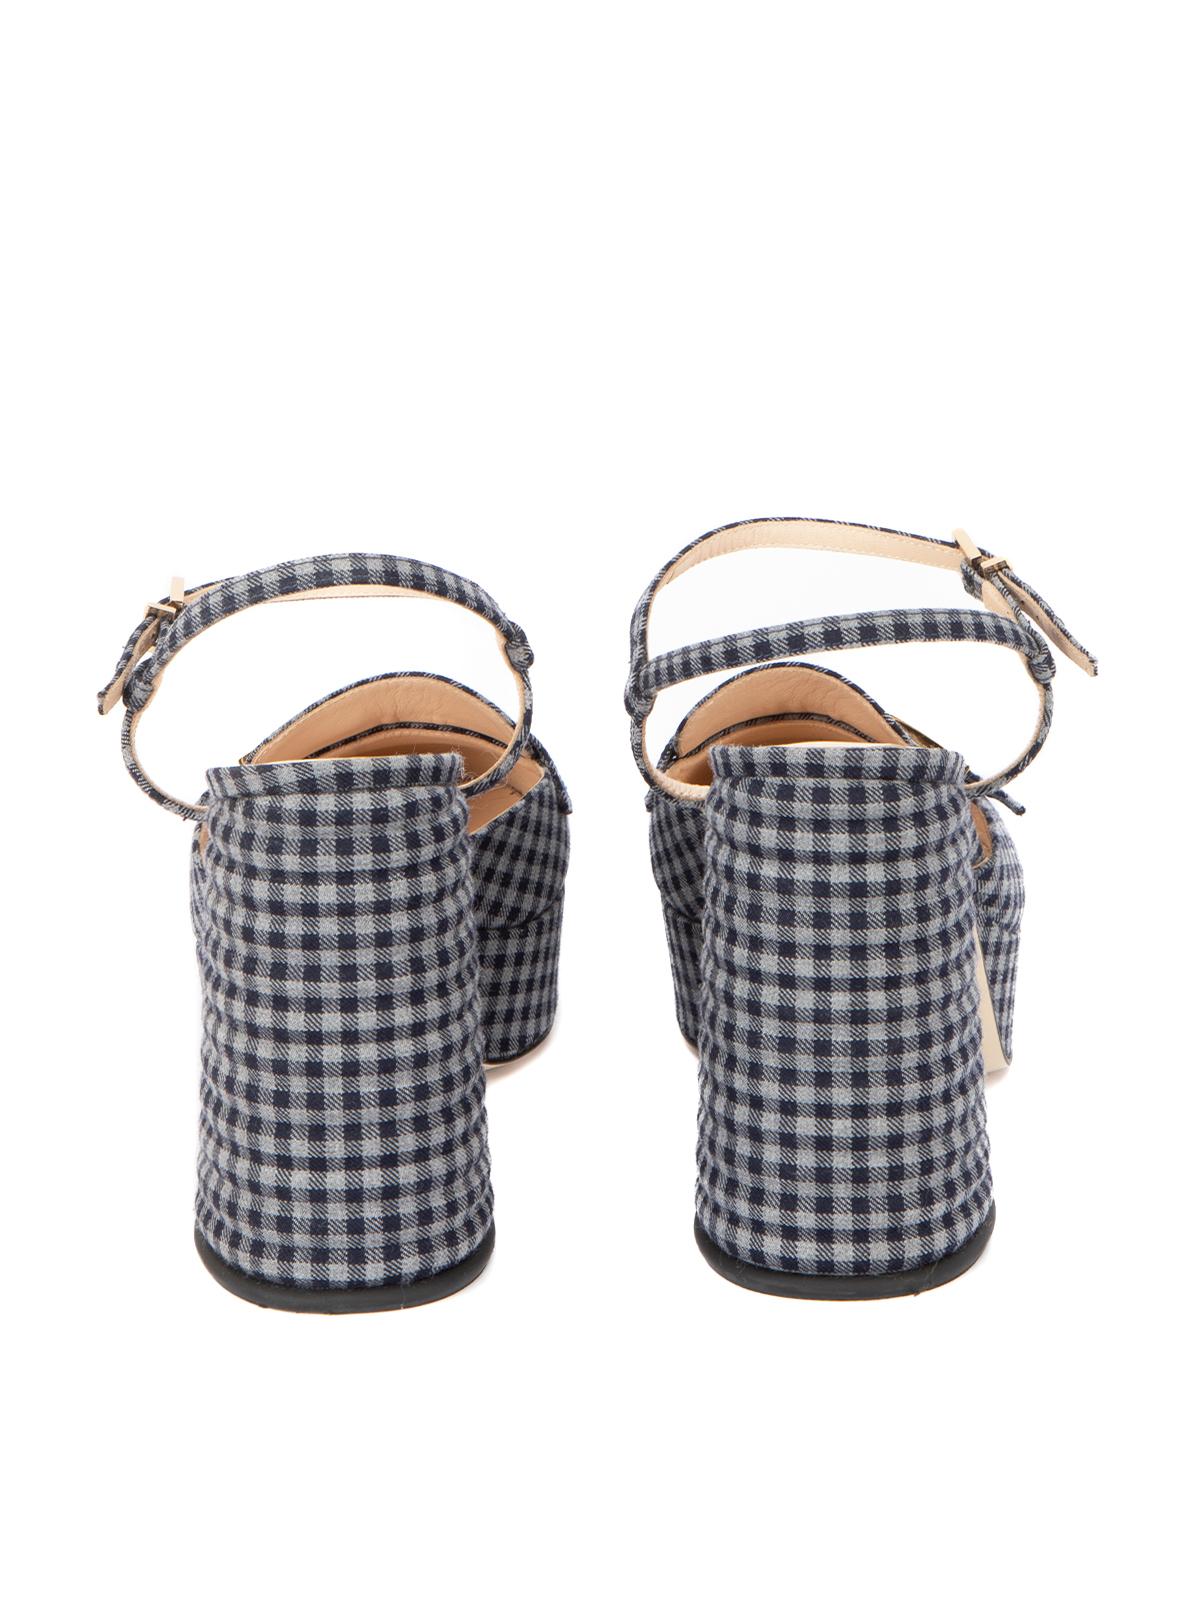 Pre-Loved Fendi Women's Gingham Vichy Promenade Moccasin Sandals In Excellent Condition In London, GB